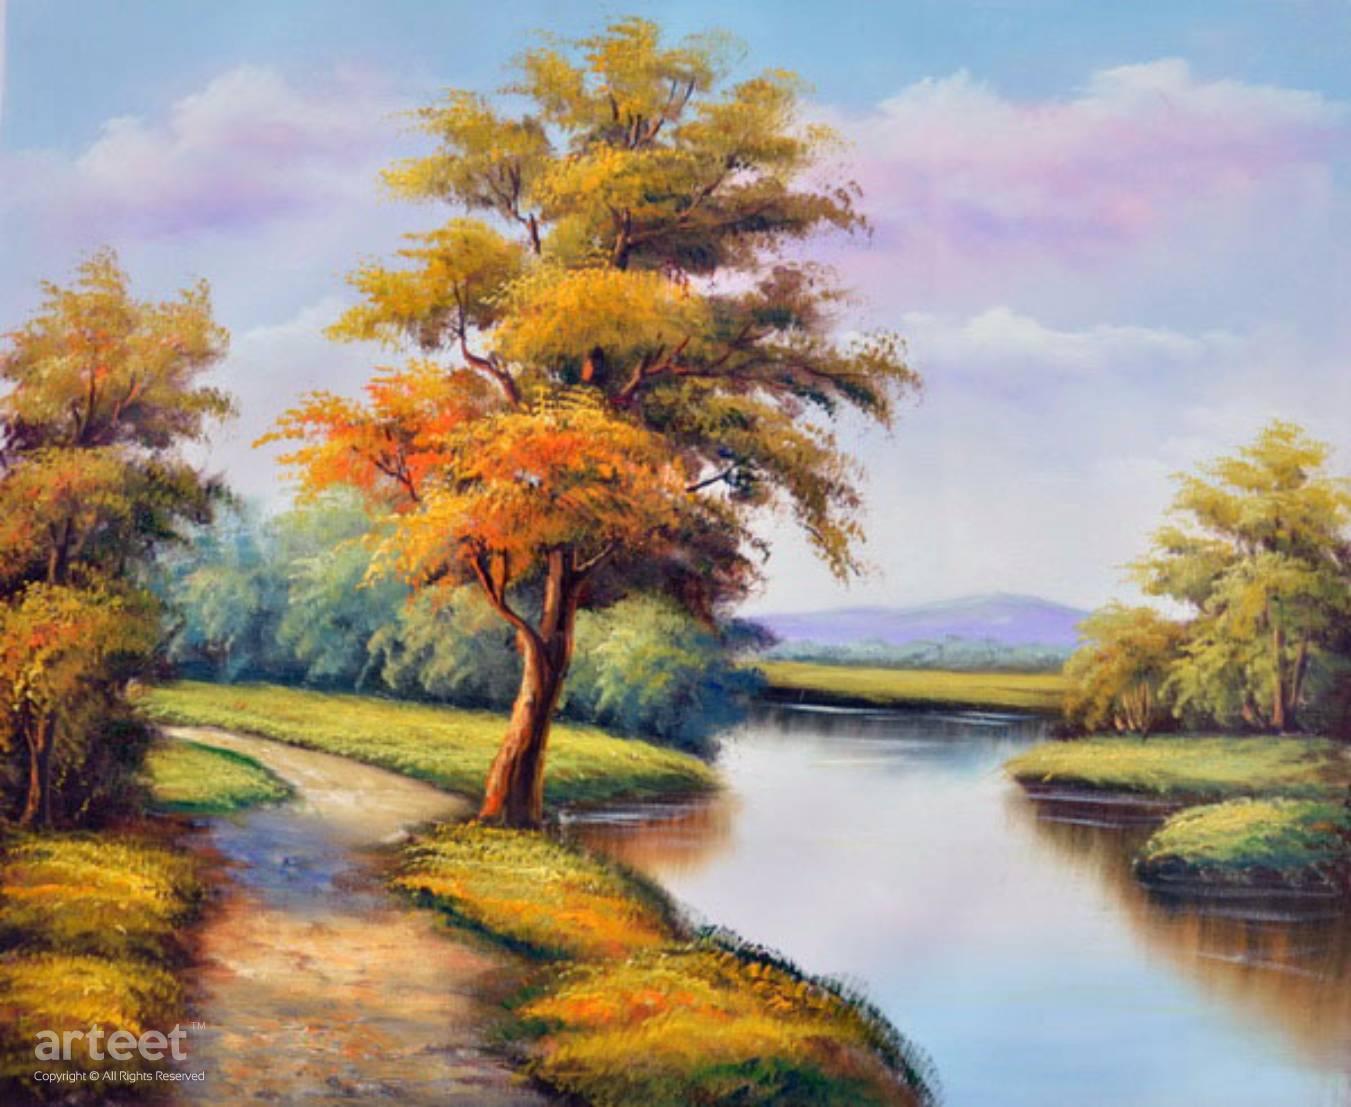 Fall Day | Art Paintings for Sale, Online Gallery